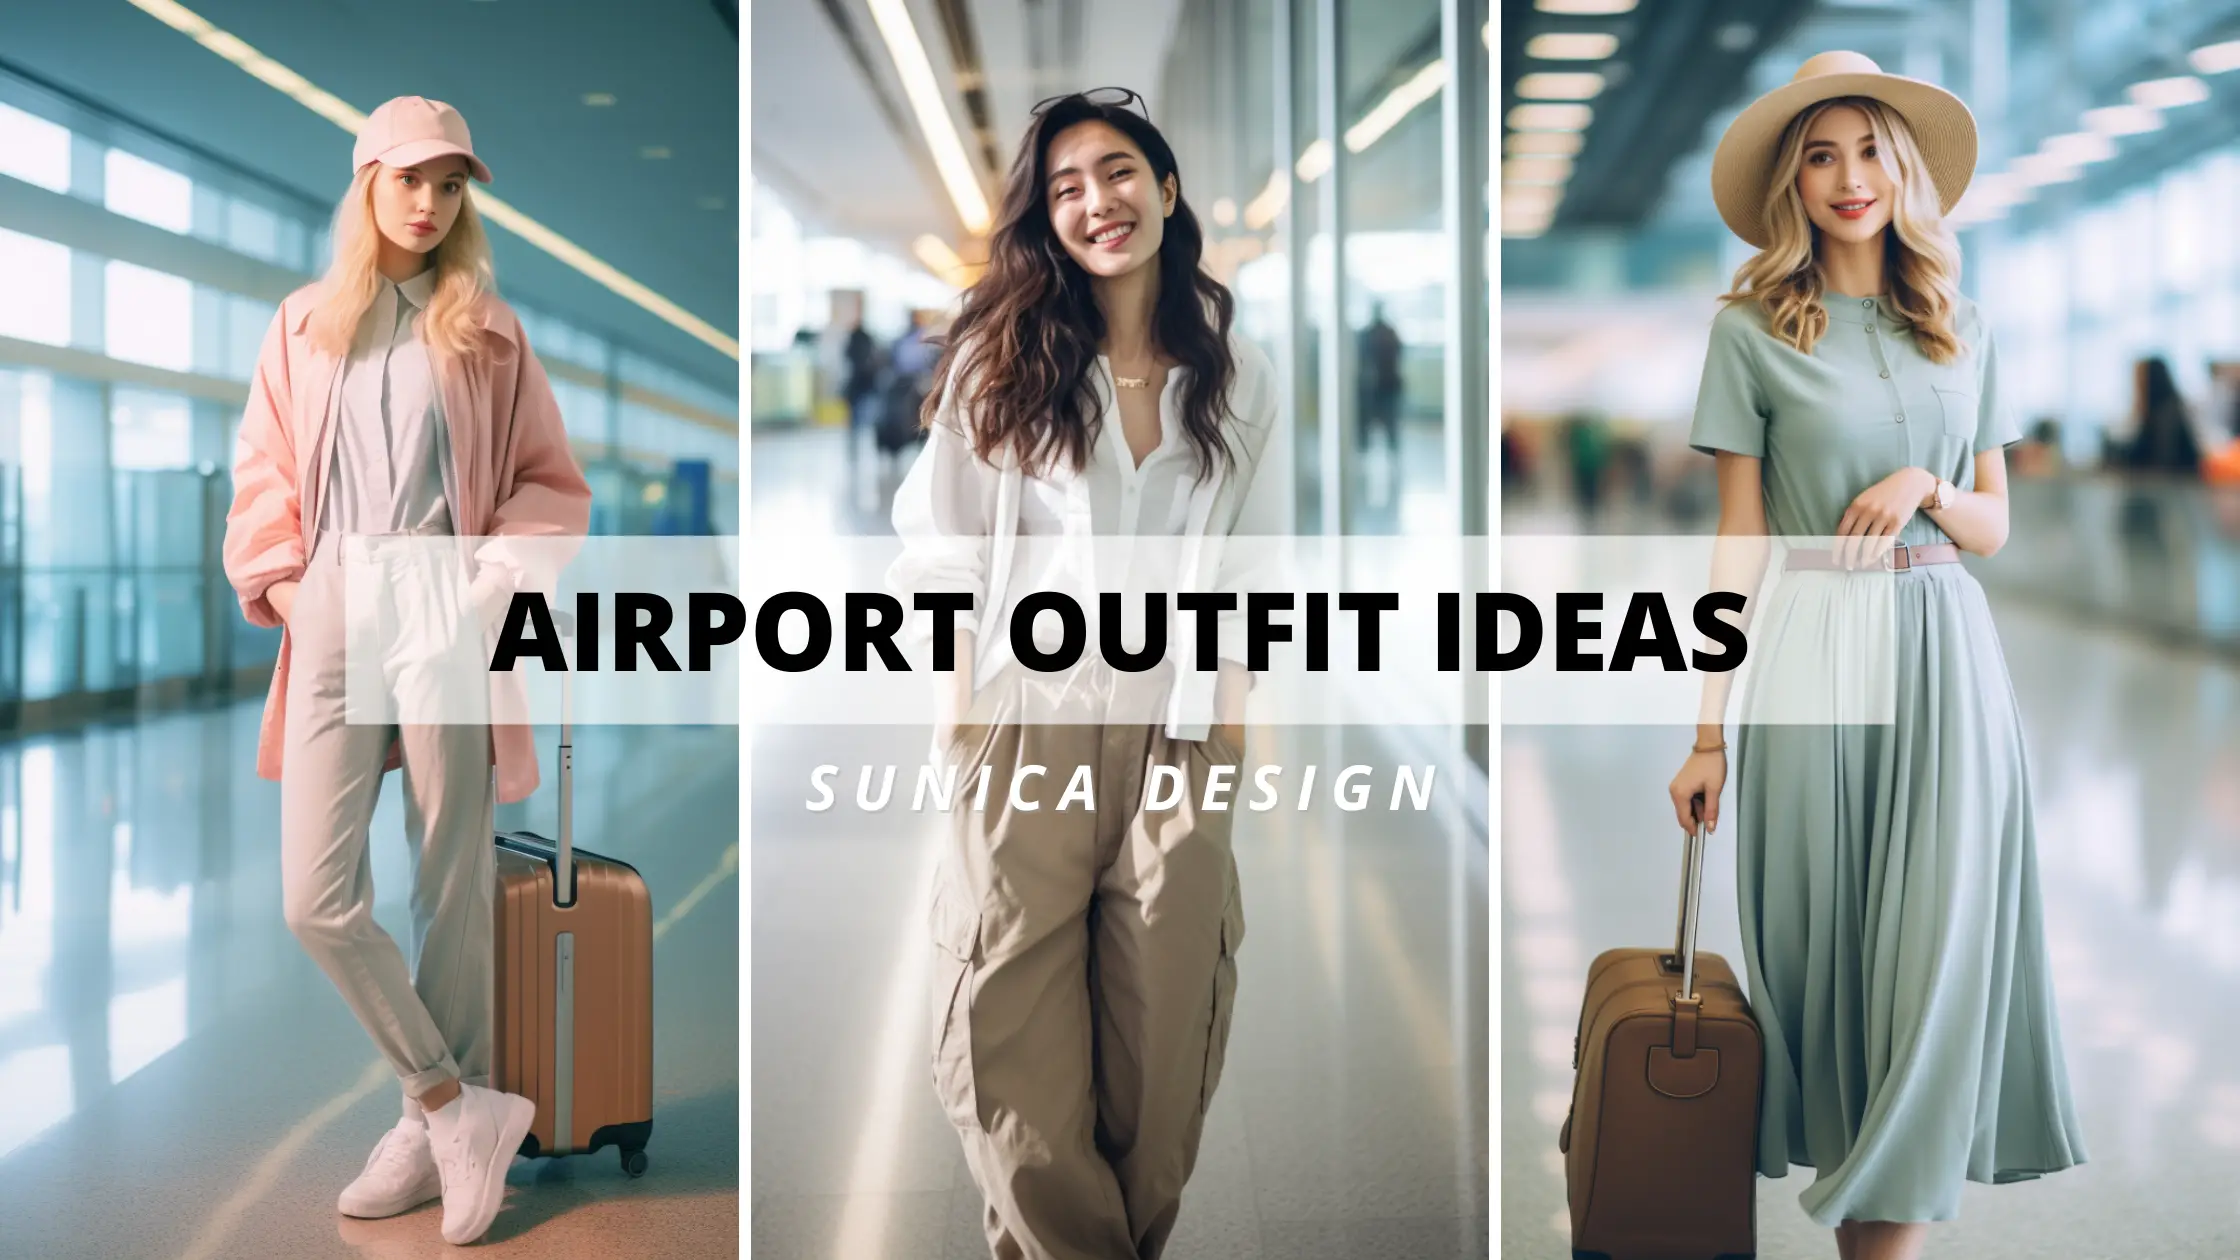 AIRPORT & TRAVEL OUTFIT IDEAS 2020 - YouTube